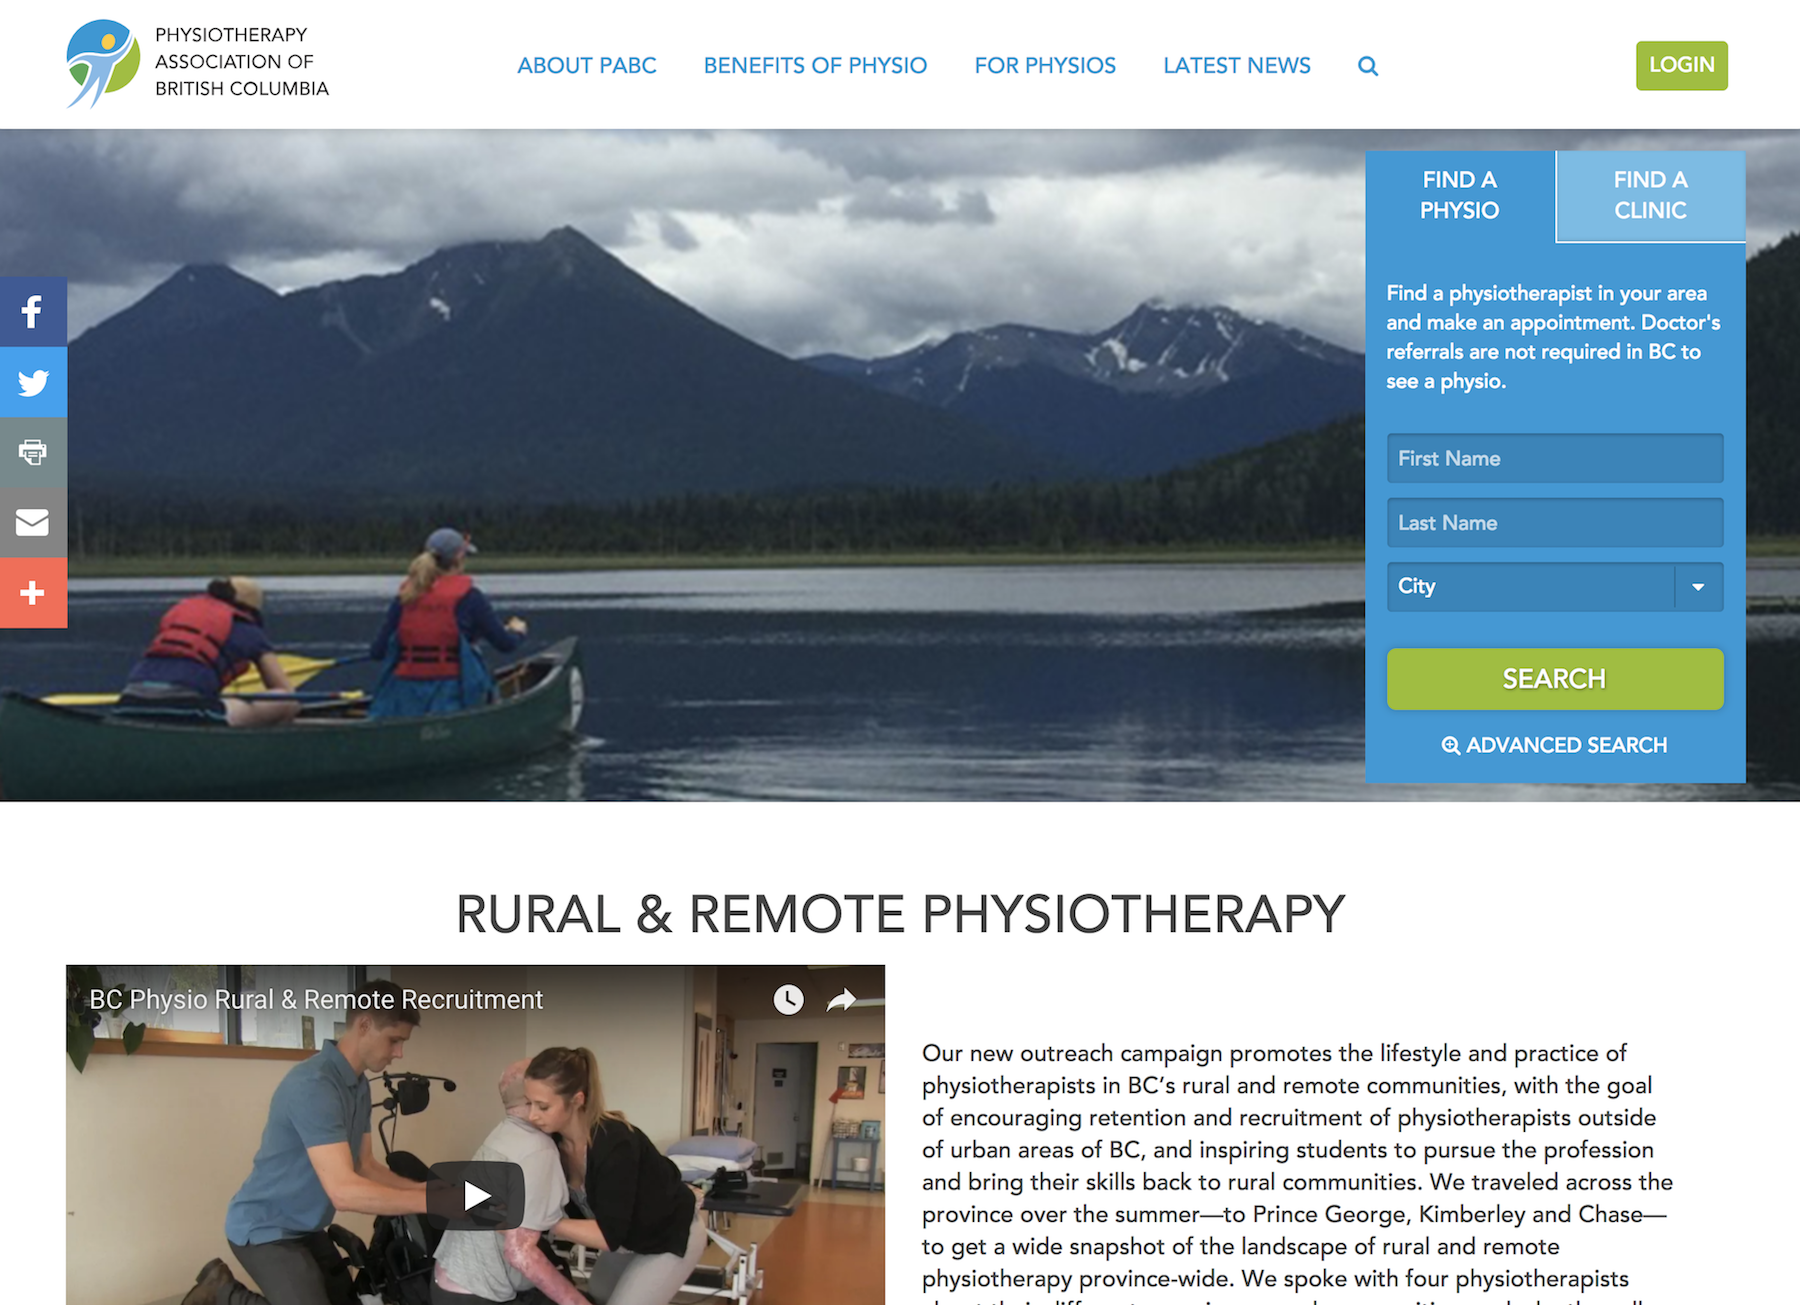 Physiotherapy Association of British Columbia